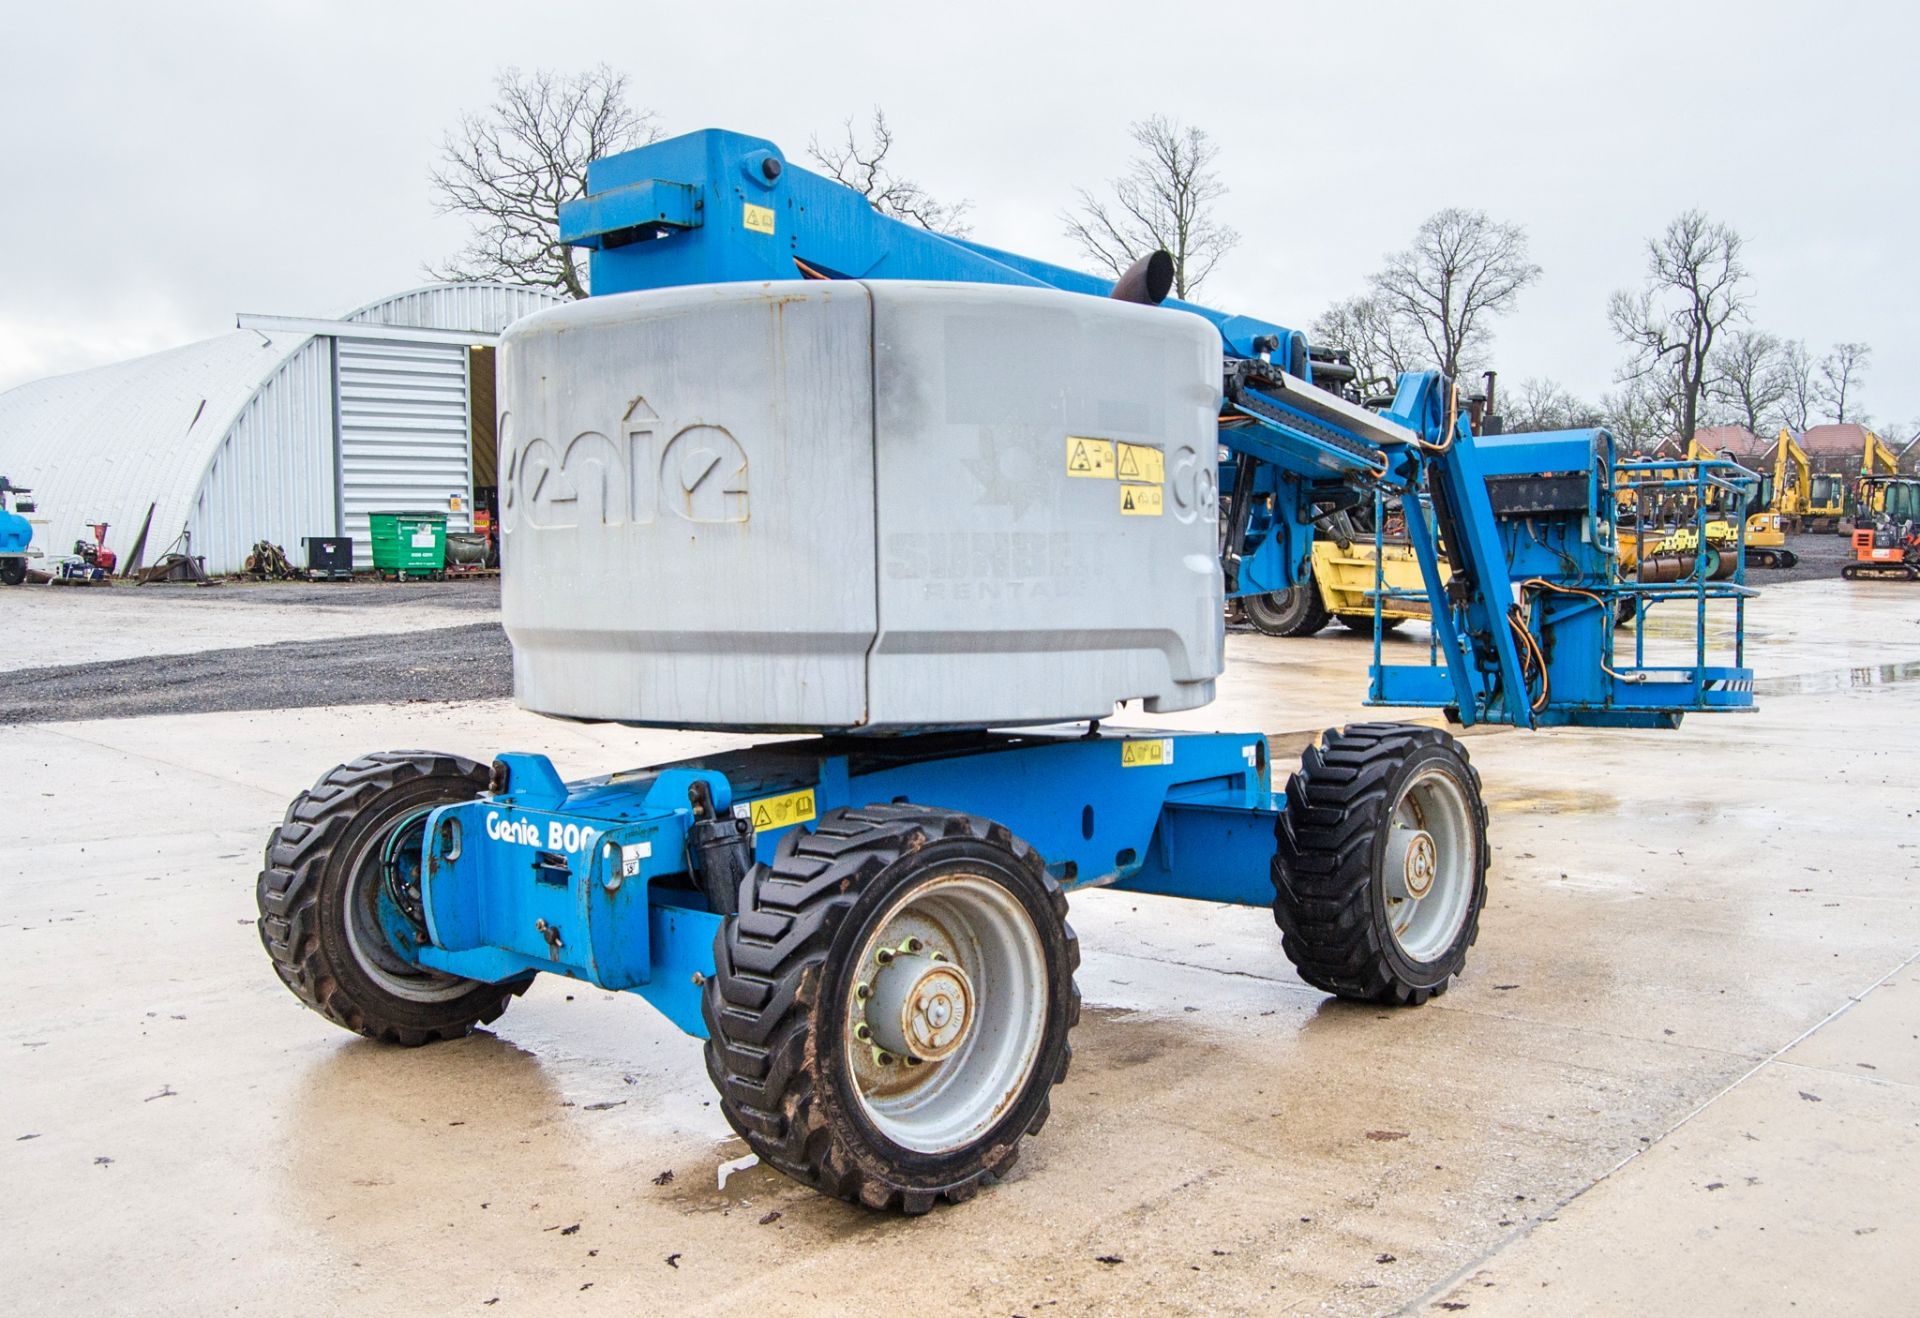 Genie Z45/25J diesel/battery electric 4 wheel drive articulated boom lift access platform Year: 2014 - Image 3 of 19